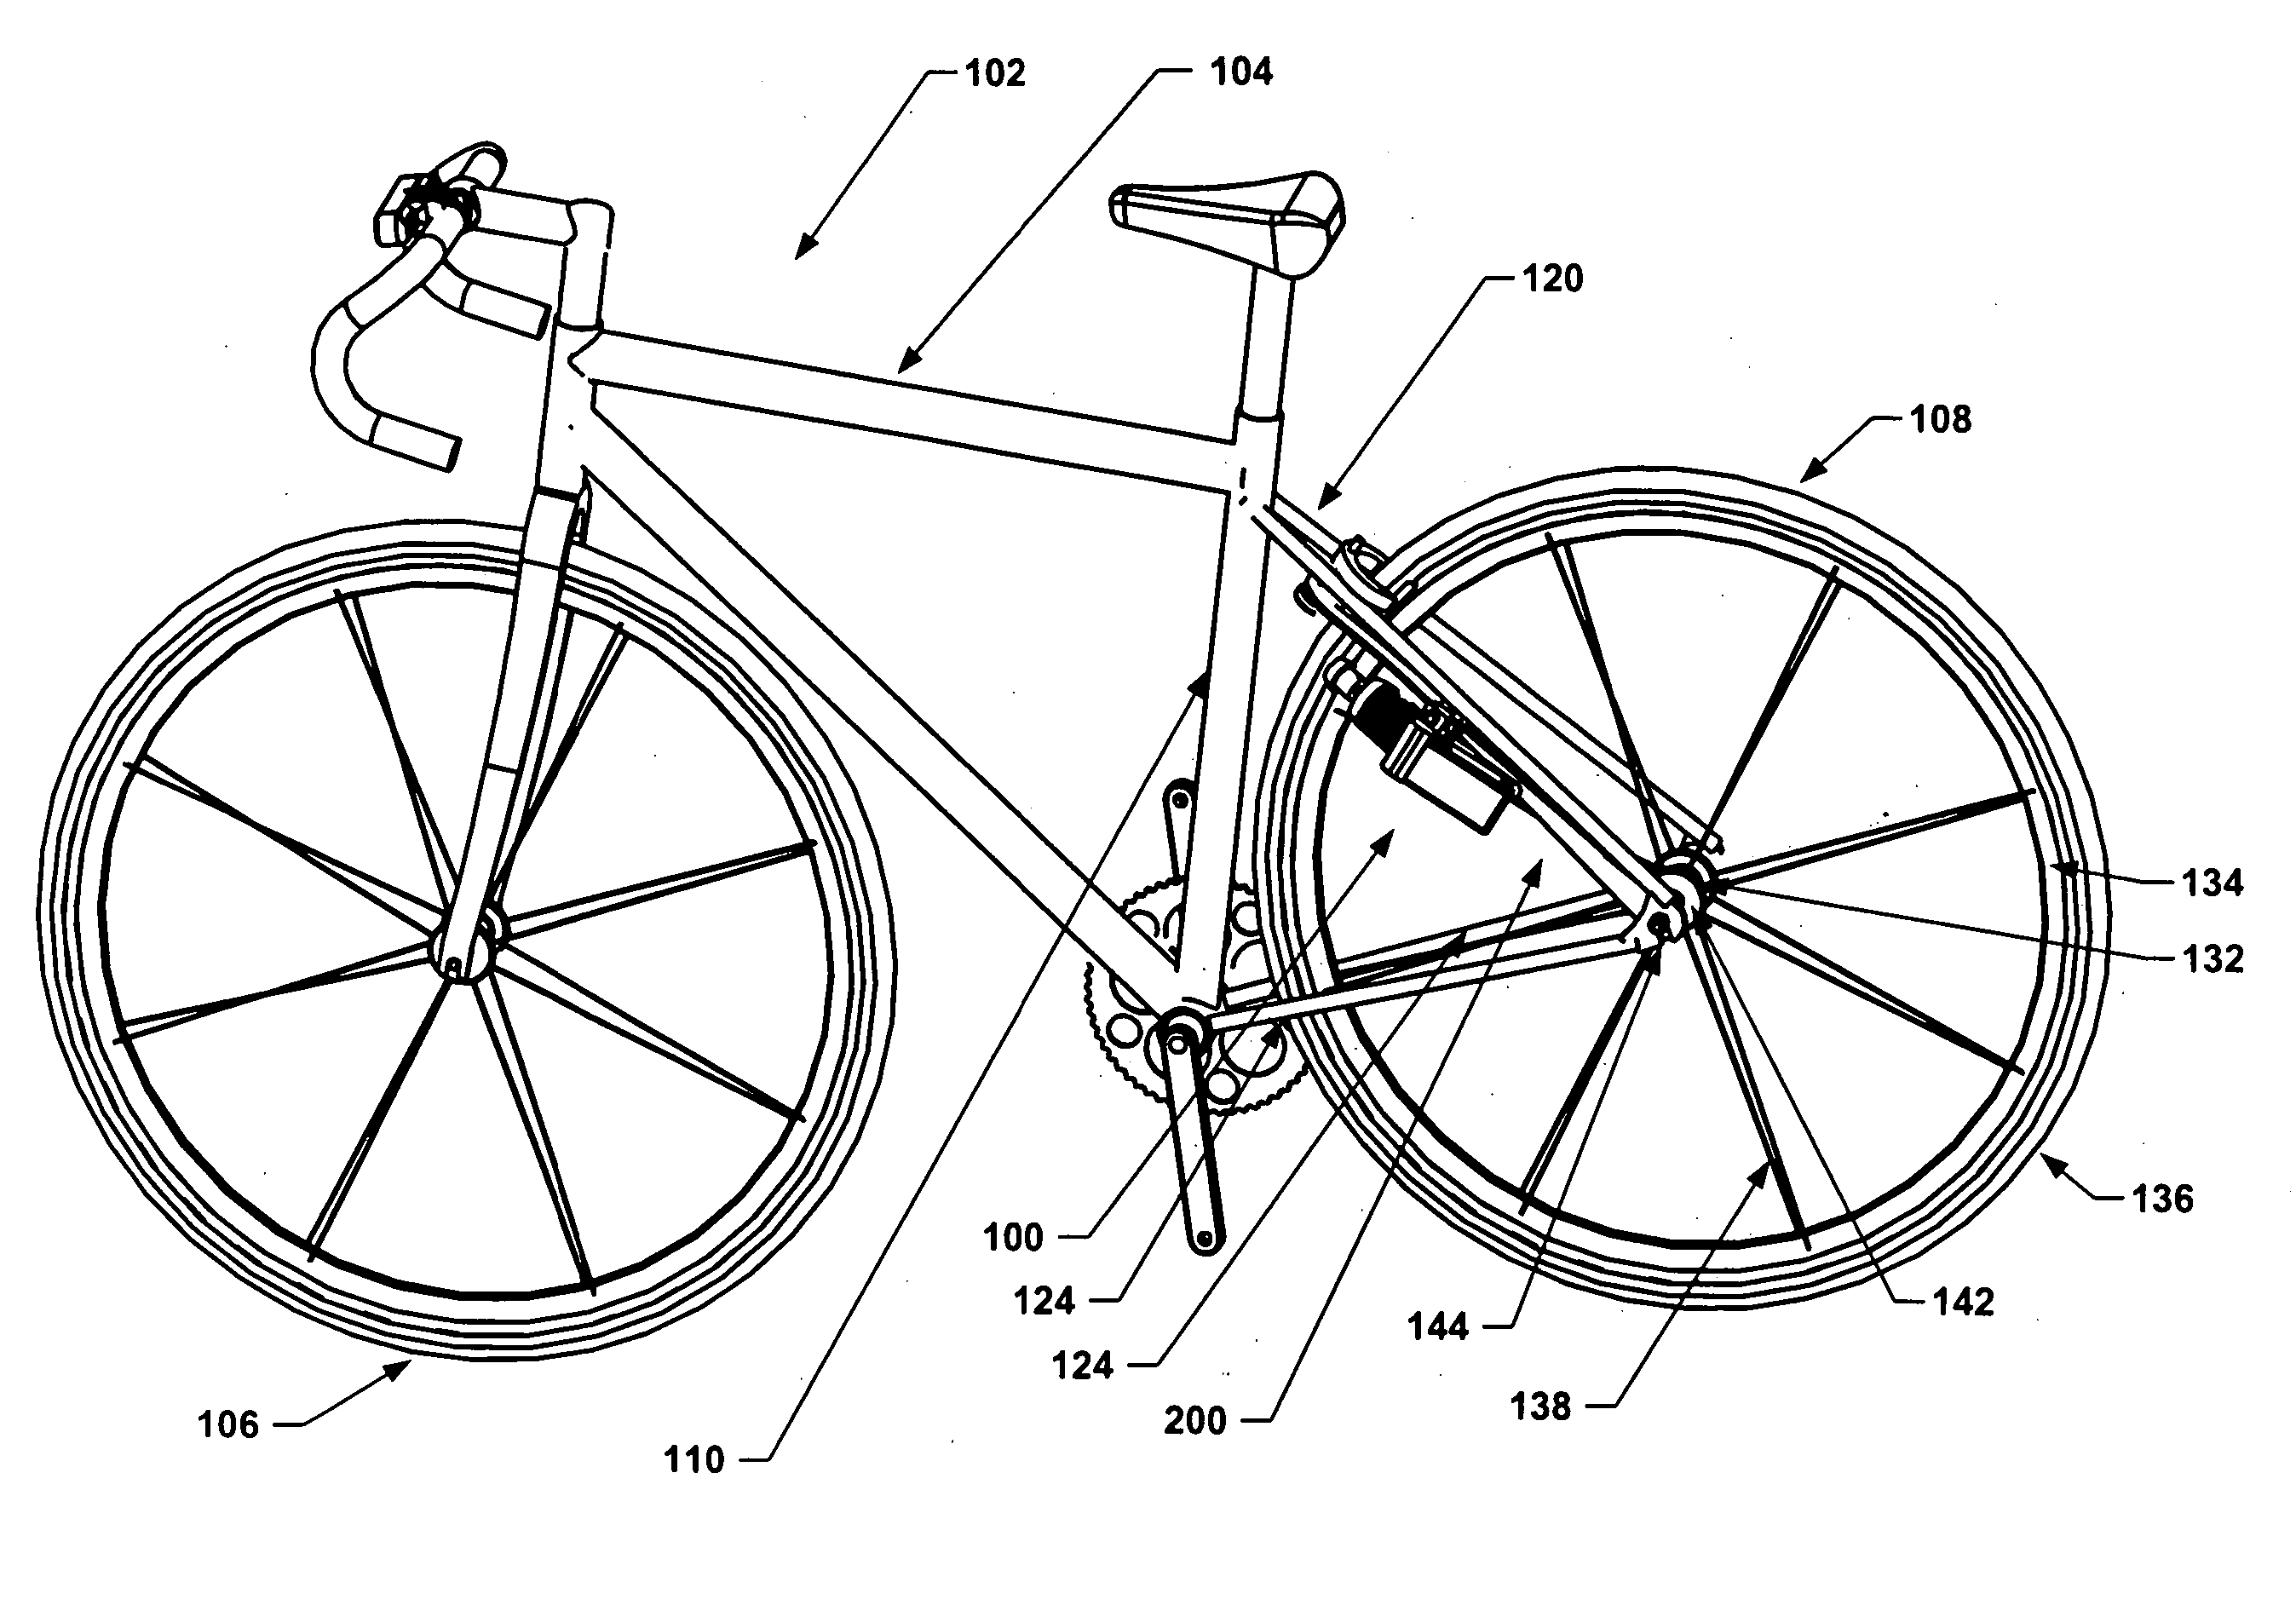 Lighting system for a bicycle